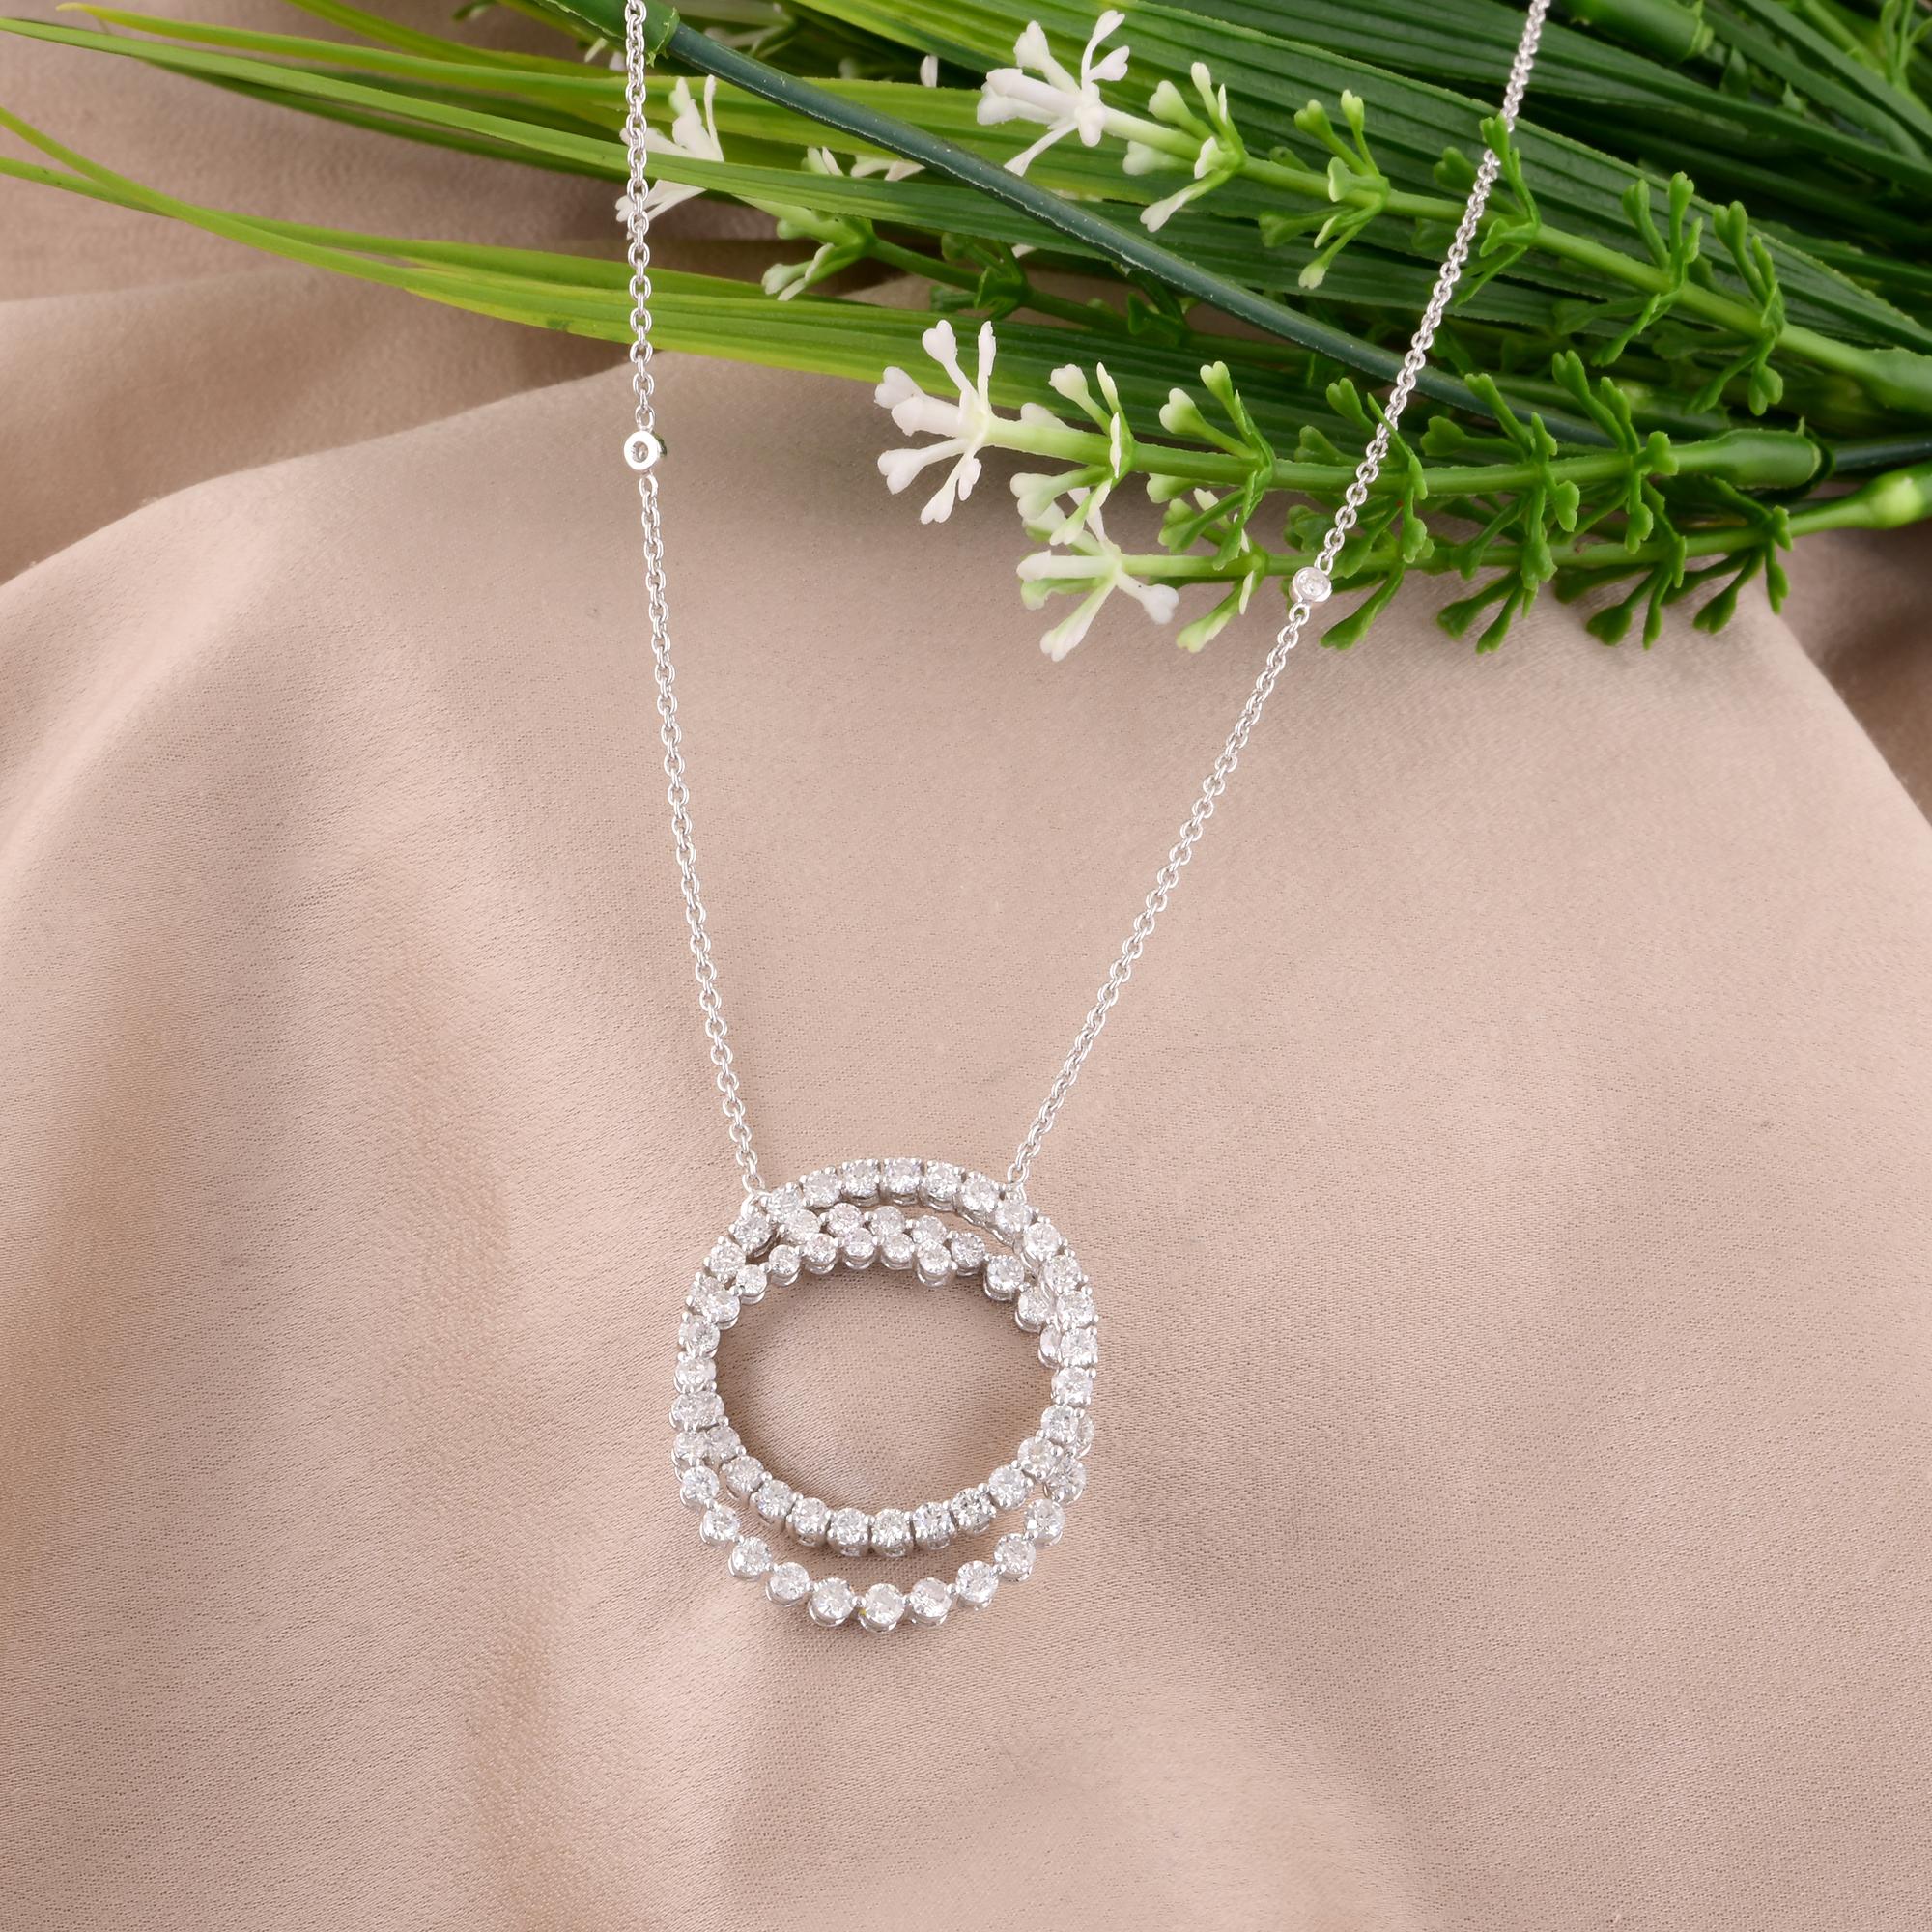 The charm pendant design adds a touch of whimsy and versatility to the piece, allowing it to be effortlessly paired with a variety of chains and necklaces. Whether worn as a standalone statement piece or layered with other favorites, this pendant is